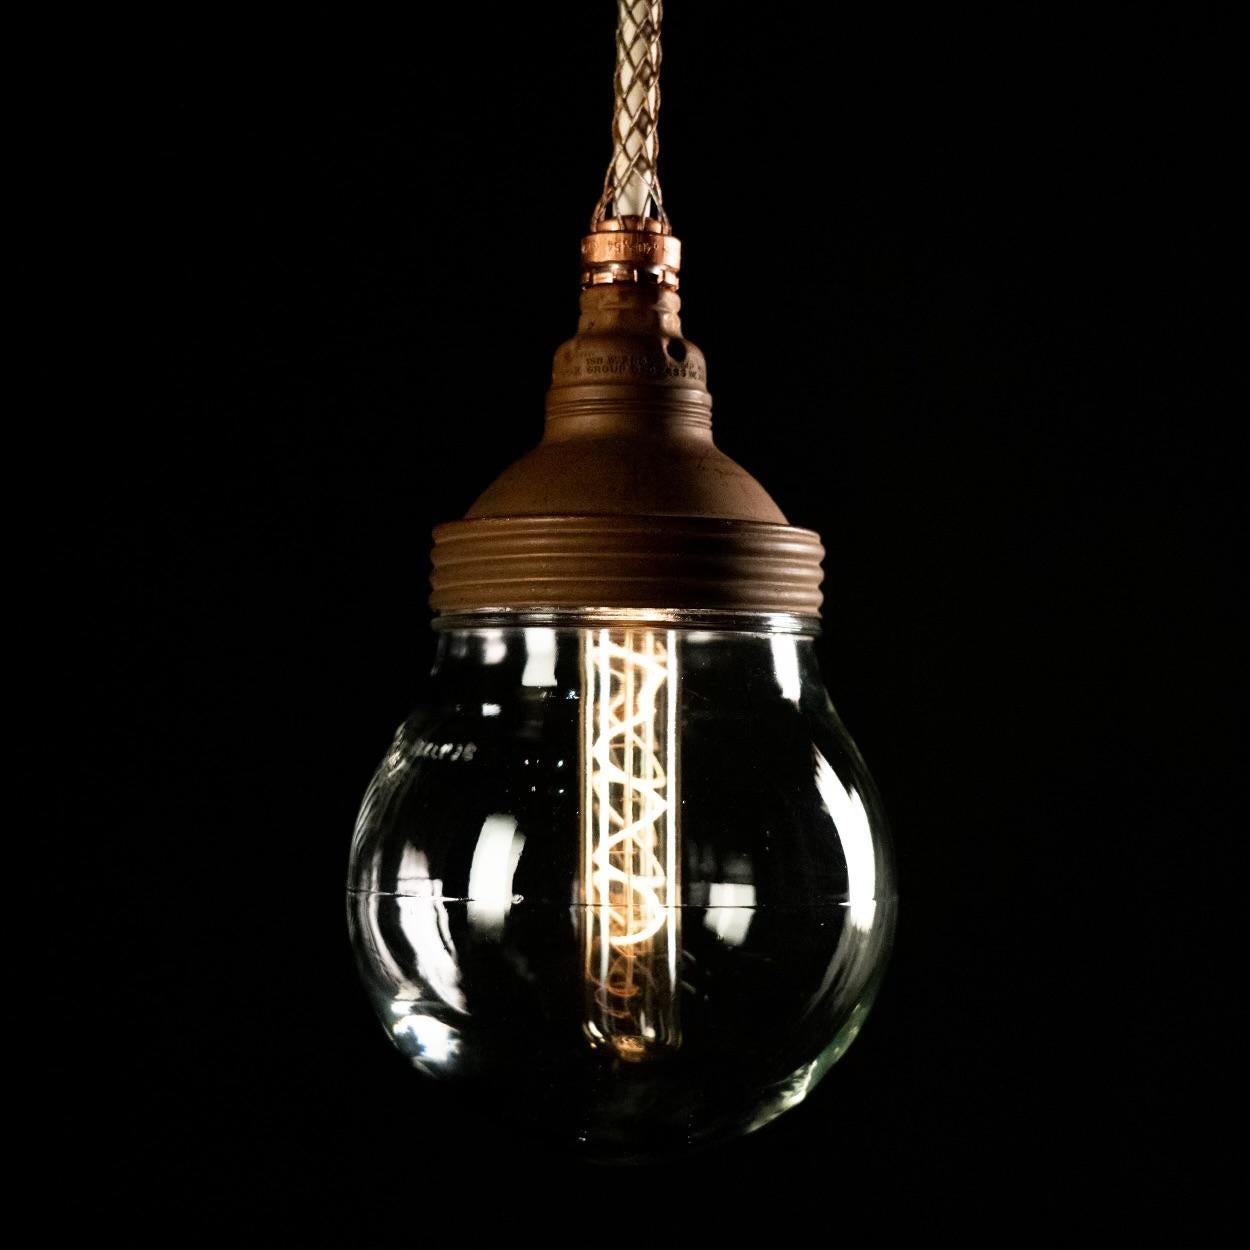 One of the more interesting industrial lights manufactured in the USA with decent gauge copper nicely patina'd with a thick glass globe... used predominantly in silos and areas where fumes could ignite a bulb they sealed perfectly .. a stylish 